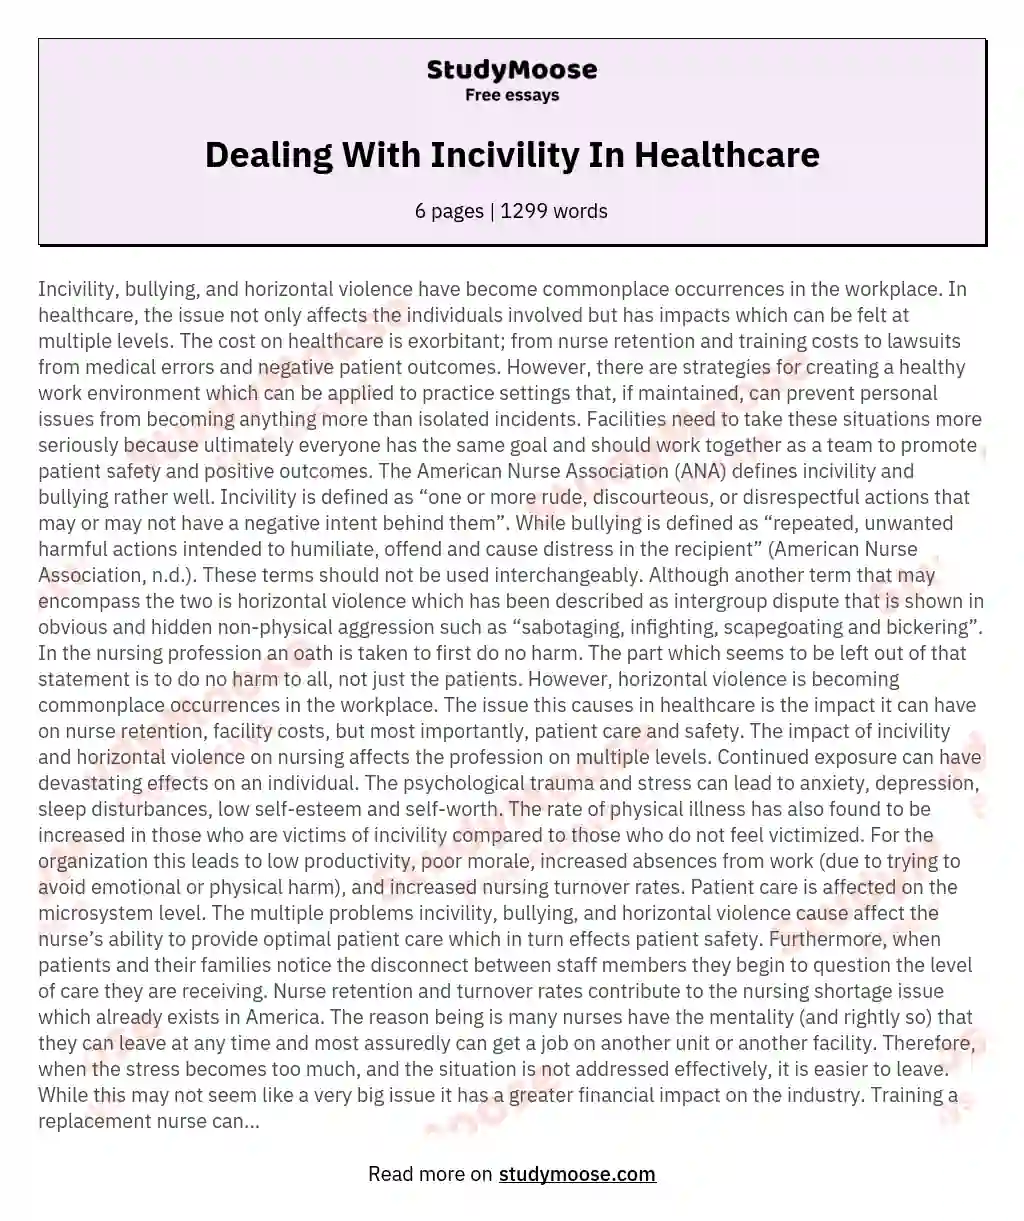 Dealing With Incivility In Healthcare essay